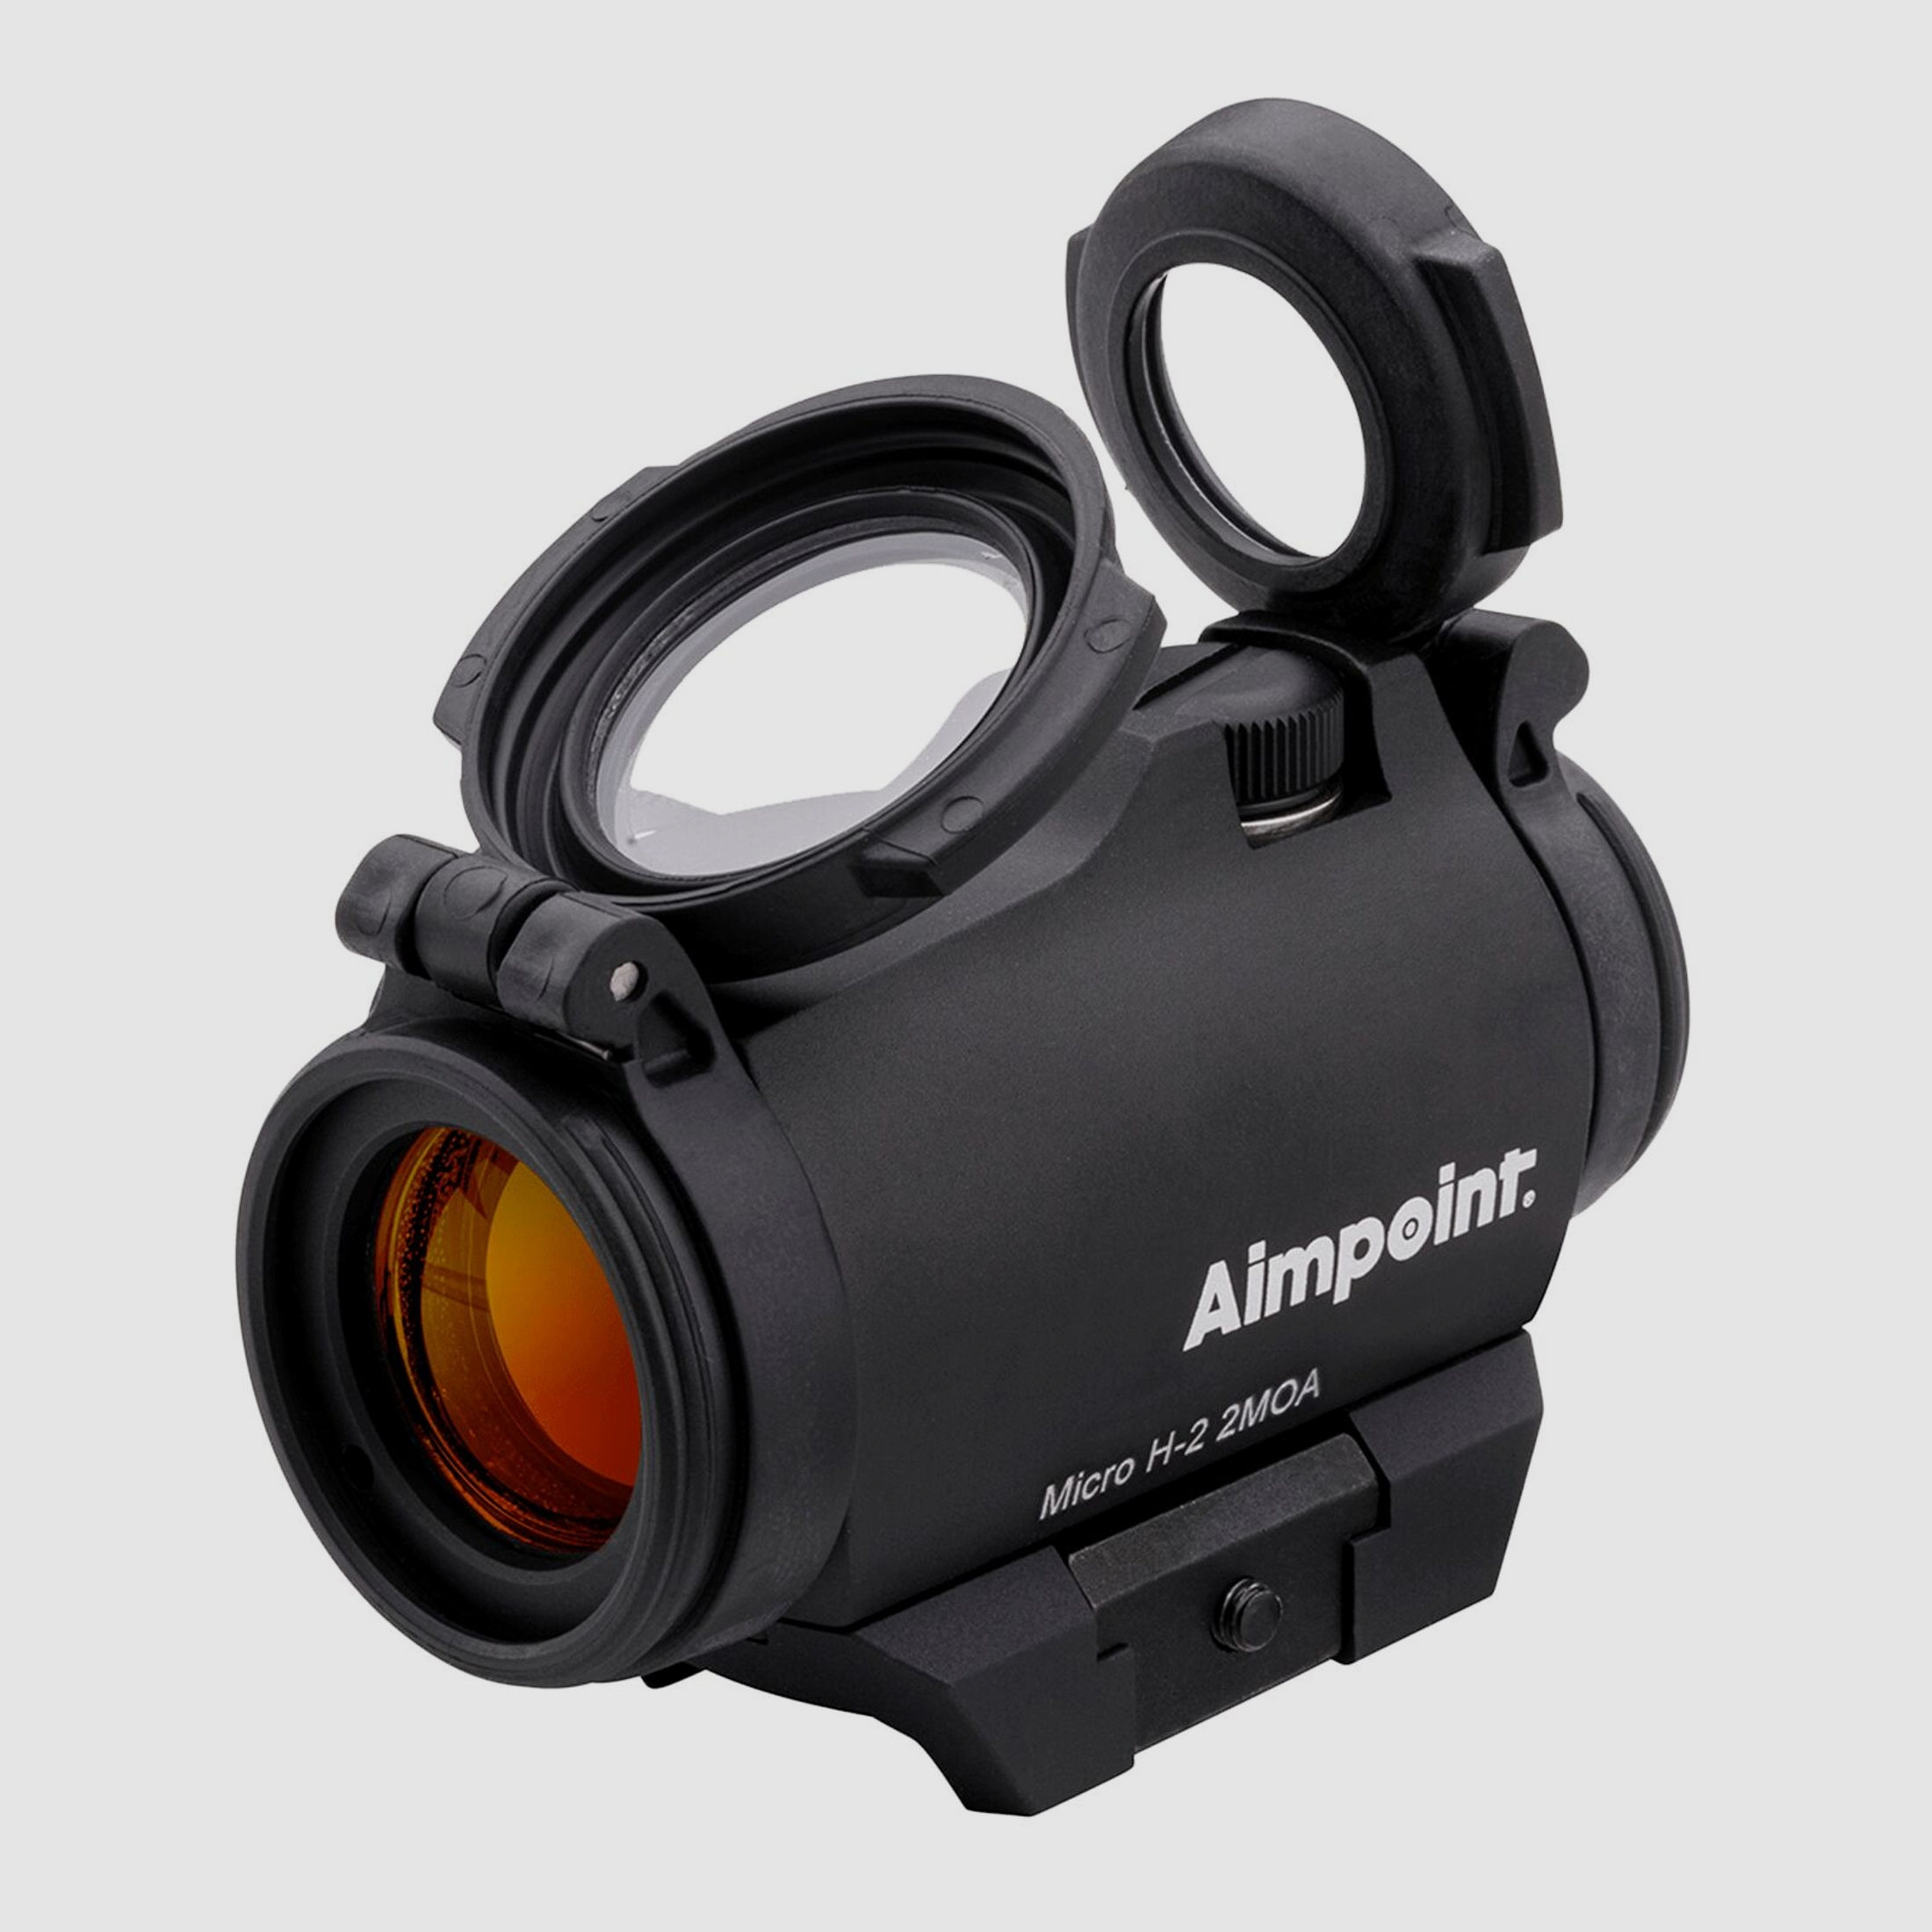 AIMPOINT	 AIMPOINT Micro H-2™ 6 MOA - Rotpunktvisier mit Standard Montage für Weaver / Picatinny